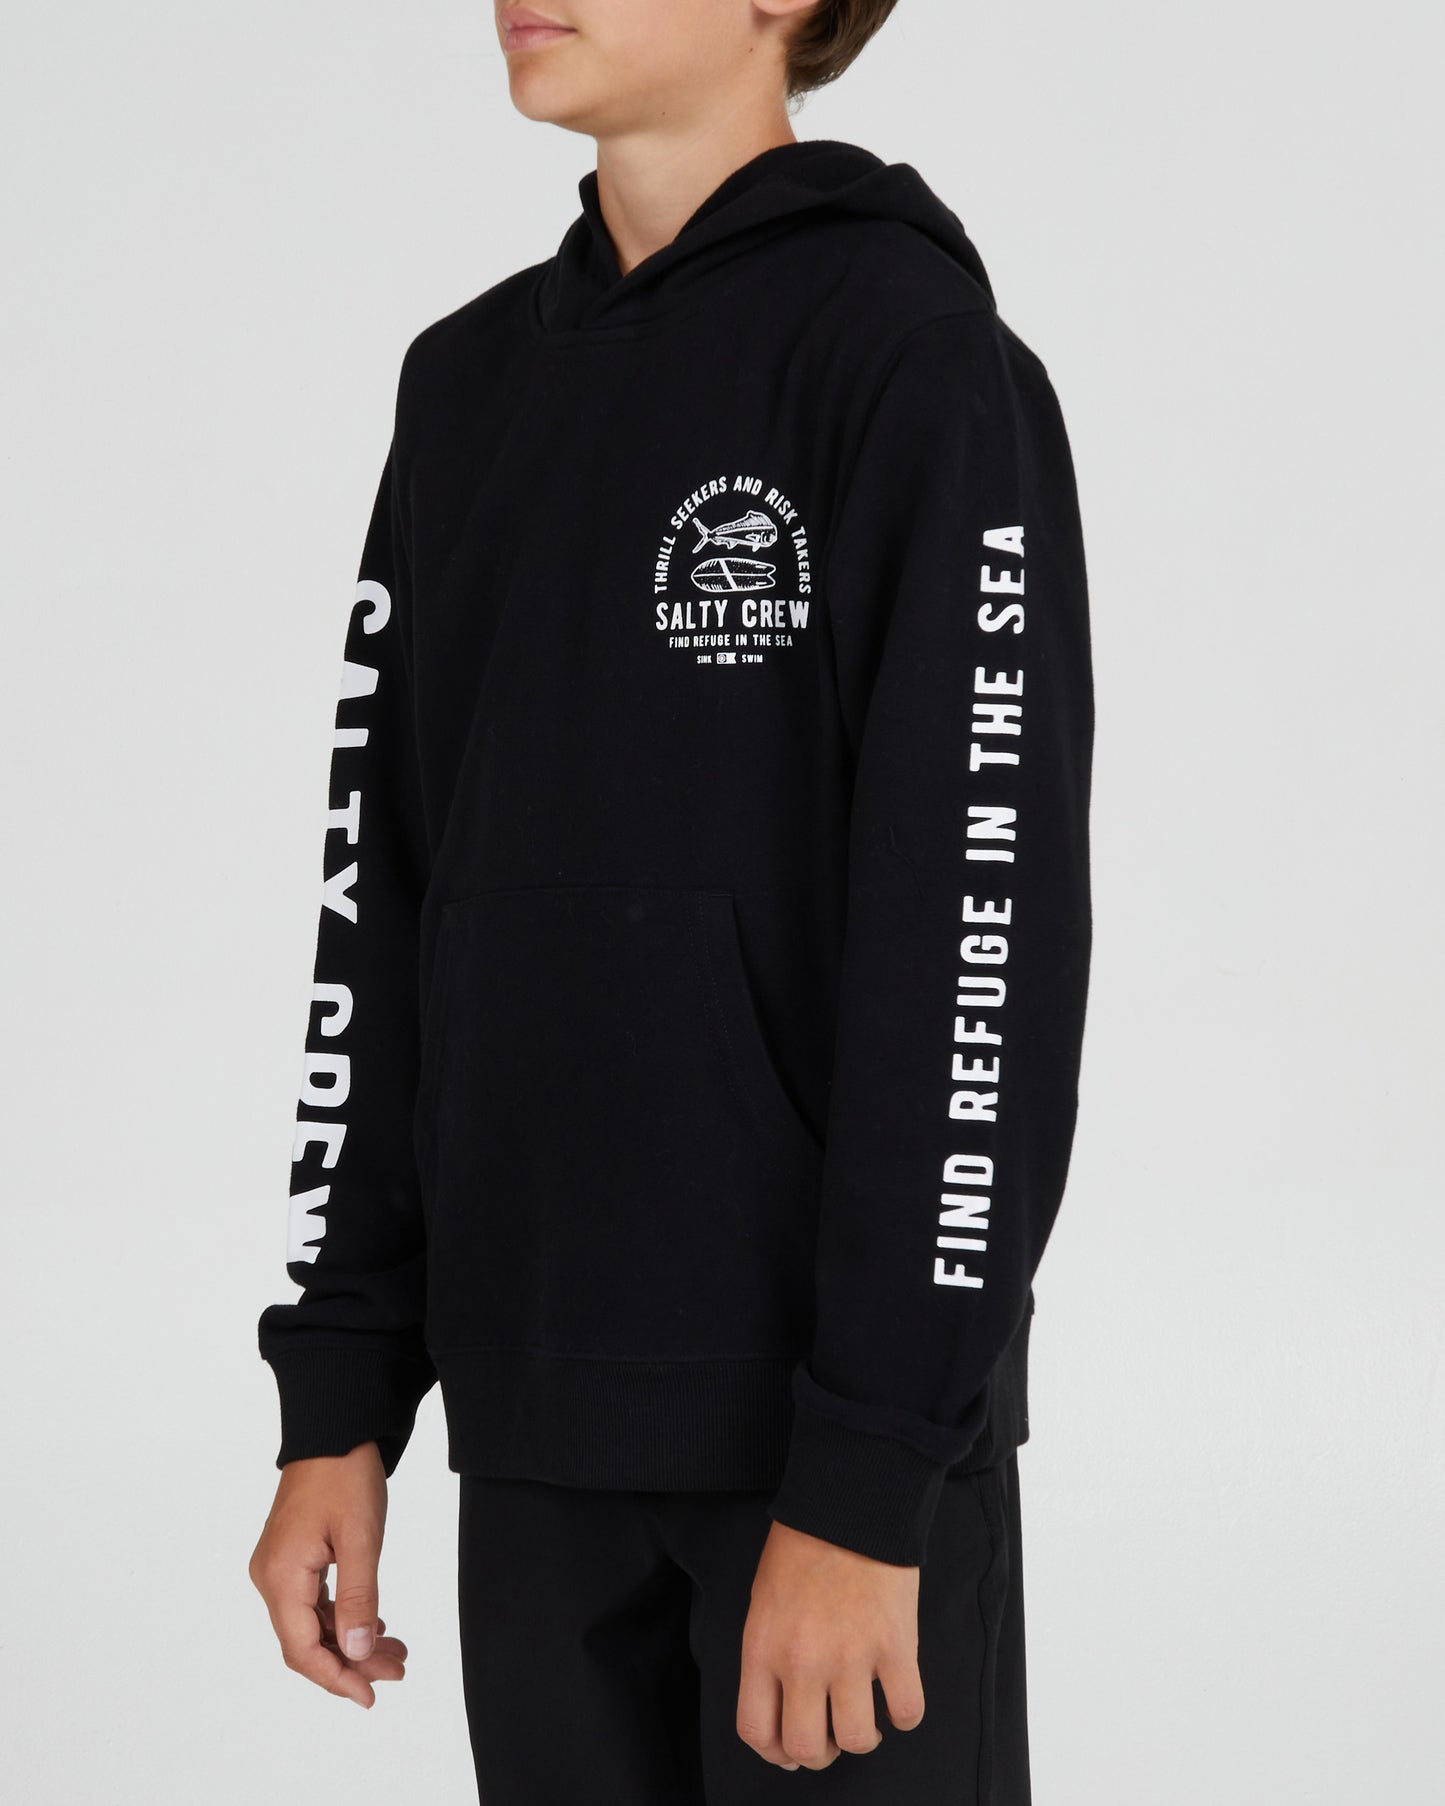 On body front angle of the Lateral Line Boys Black Hooded Fleece